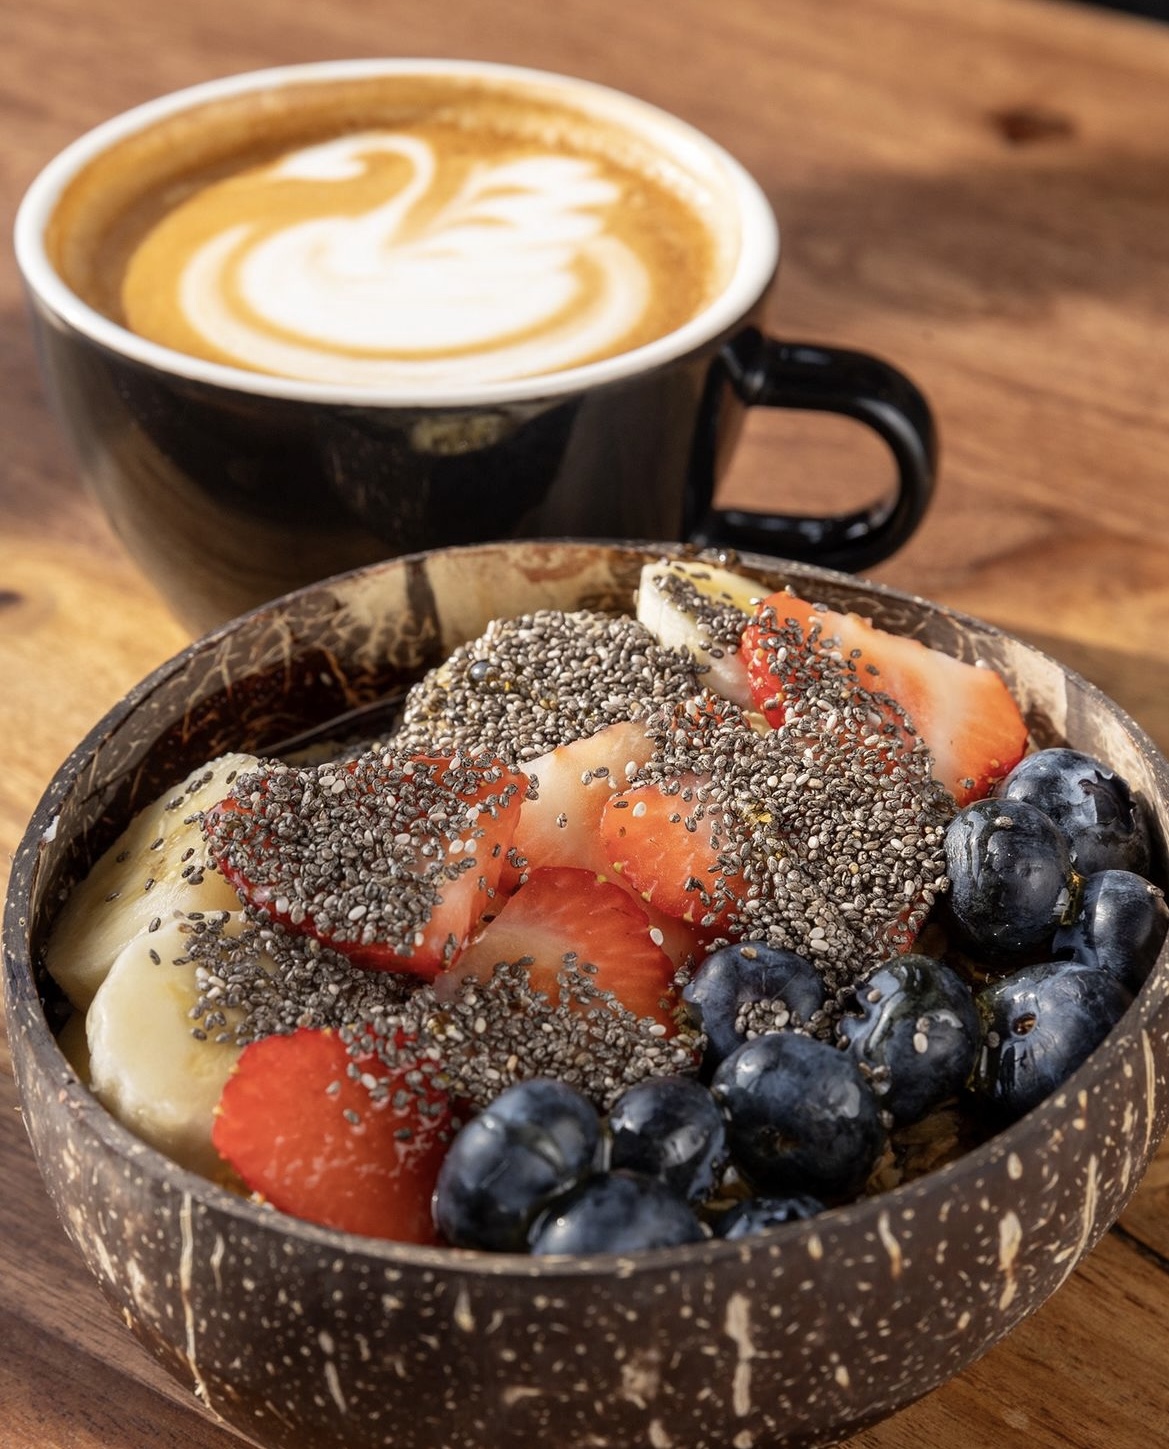 The Açaí Bowl at Soluna, packed with crunchy granola, chia seeds, coconut flakes, blueberries, strawberries, and bananas.